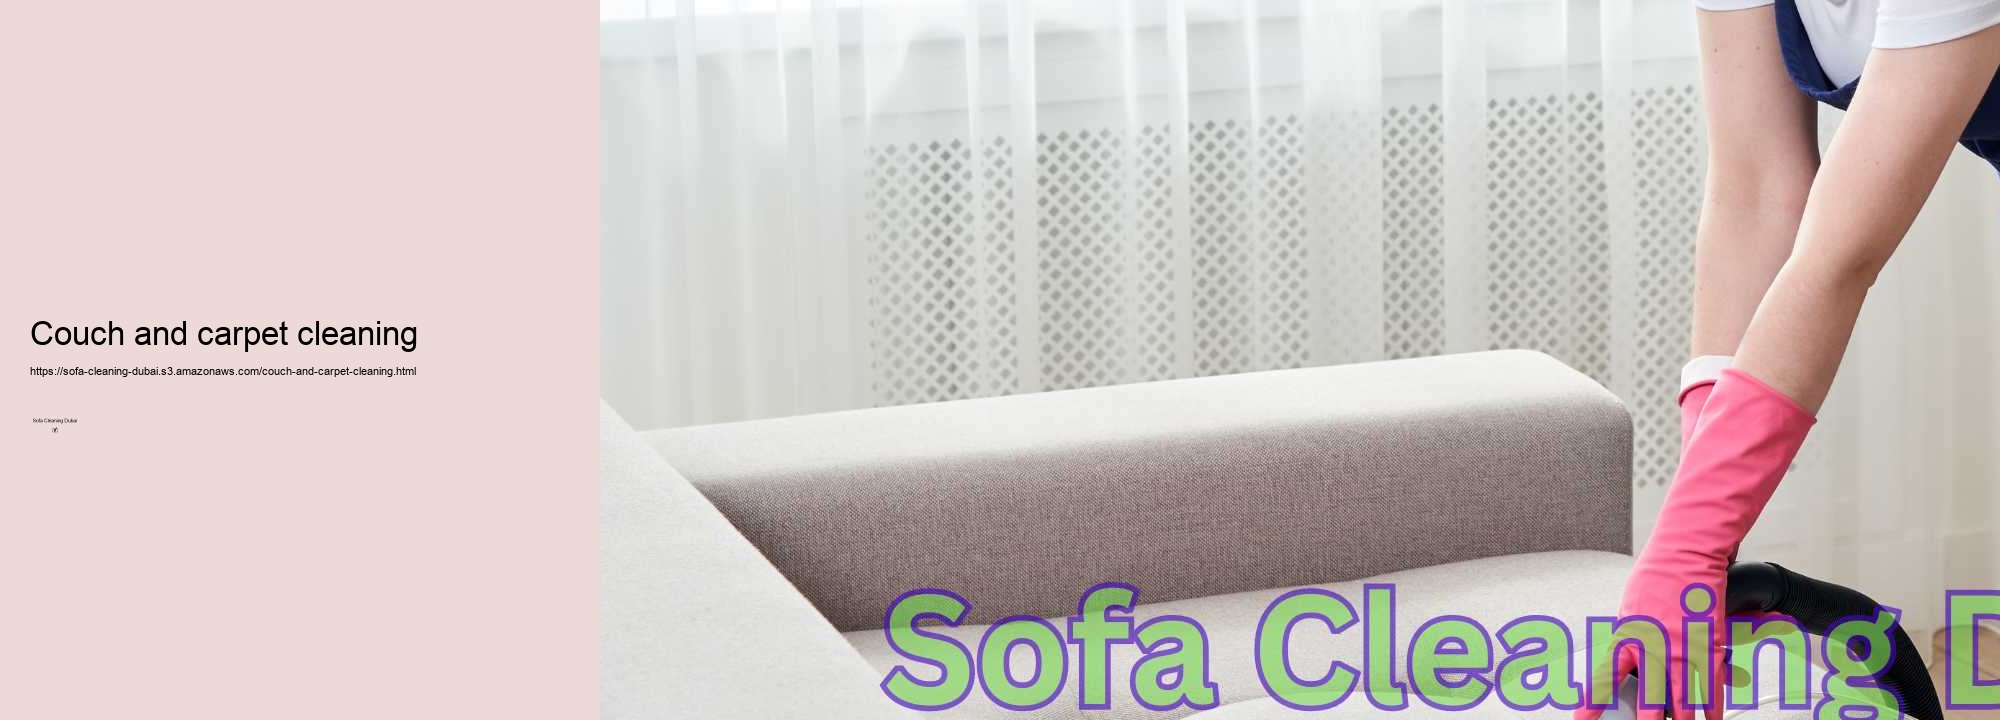 Couch and carpet cleaning